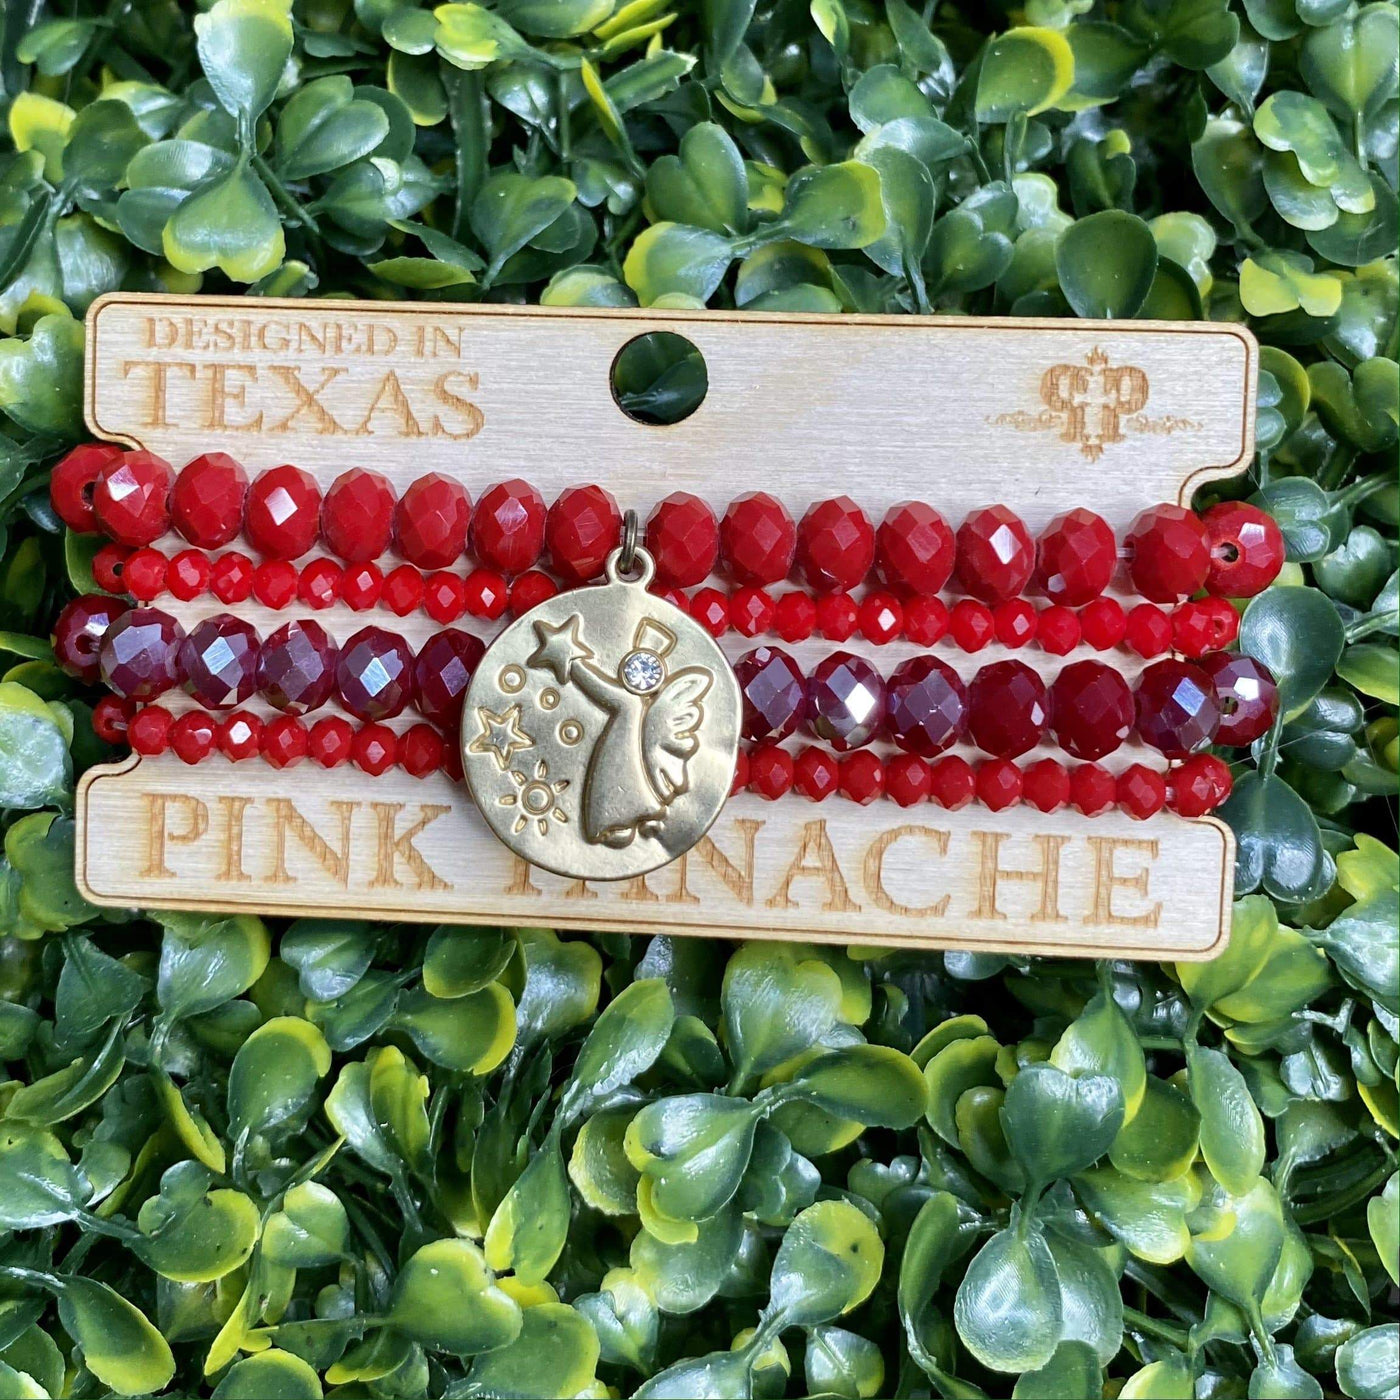 Pink Panache Red Angel Bracelet set Shabby Chic Boutique and Tanning Salon